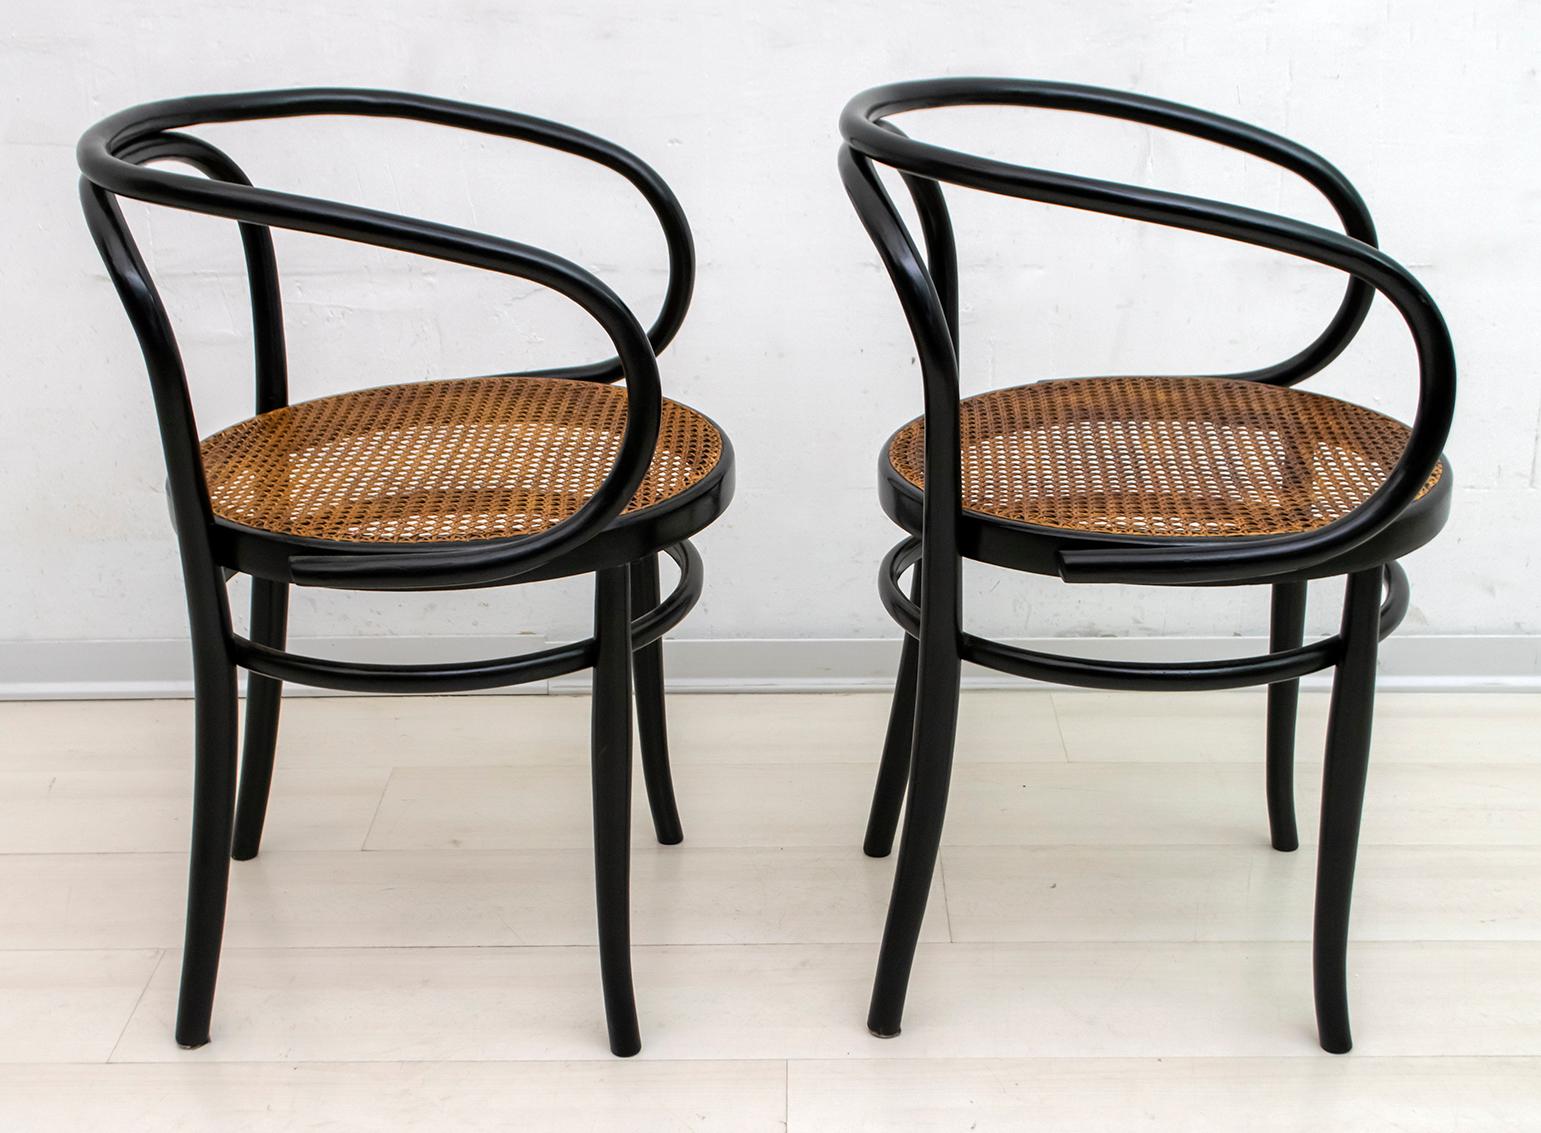 Austrian Thonet Early 20th Century Bent Beech and Vienna Straw Chairs, 1920s